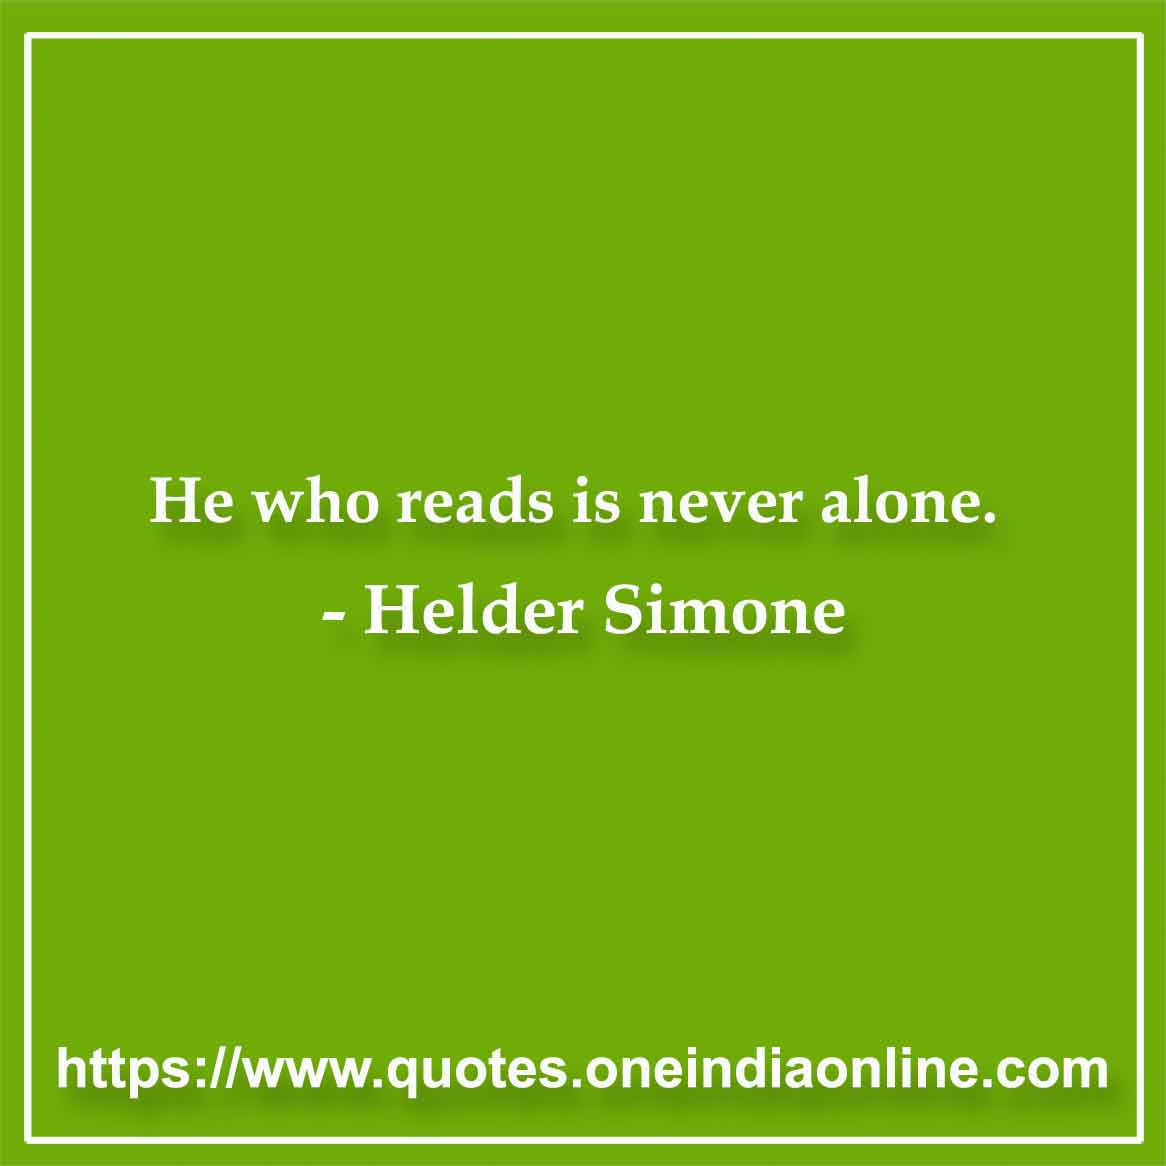 He who reads is never alone.

- Helder Simone